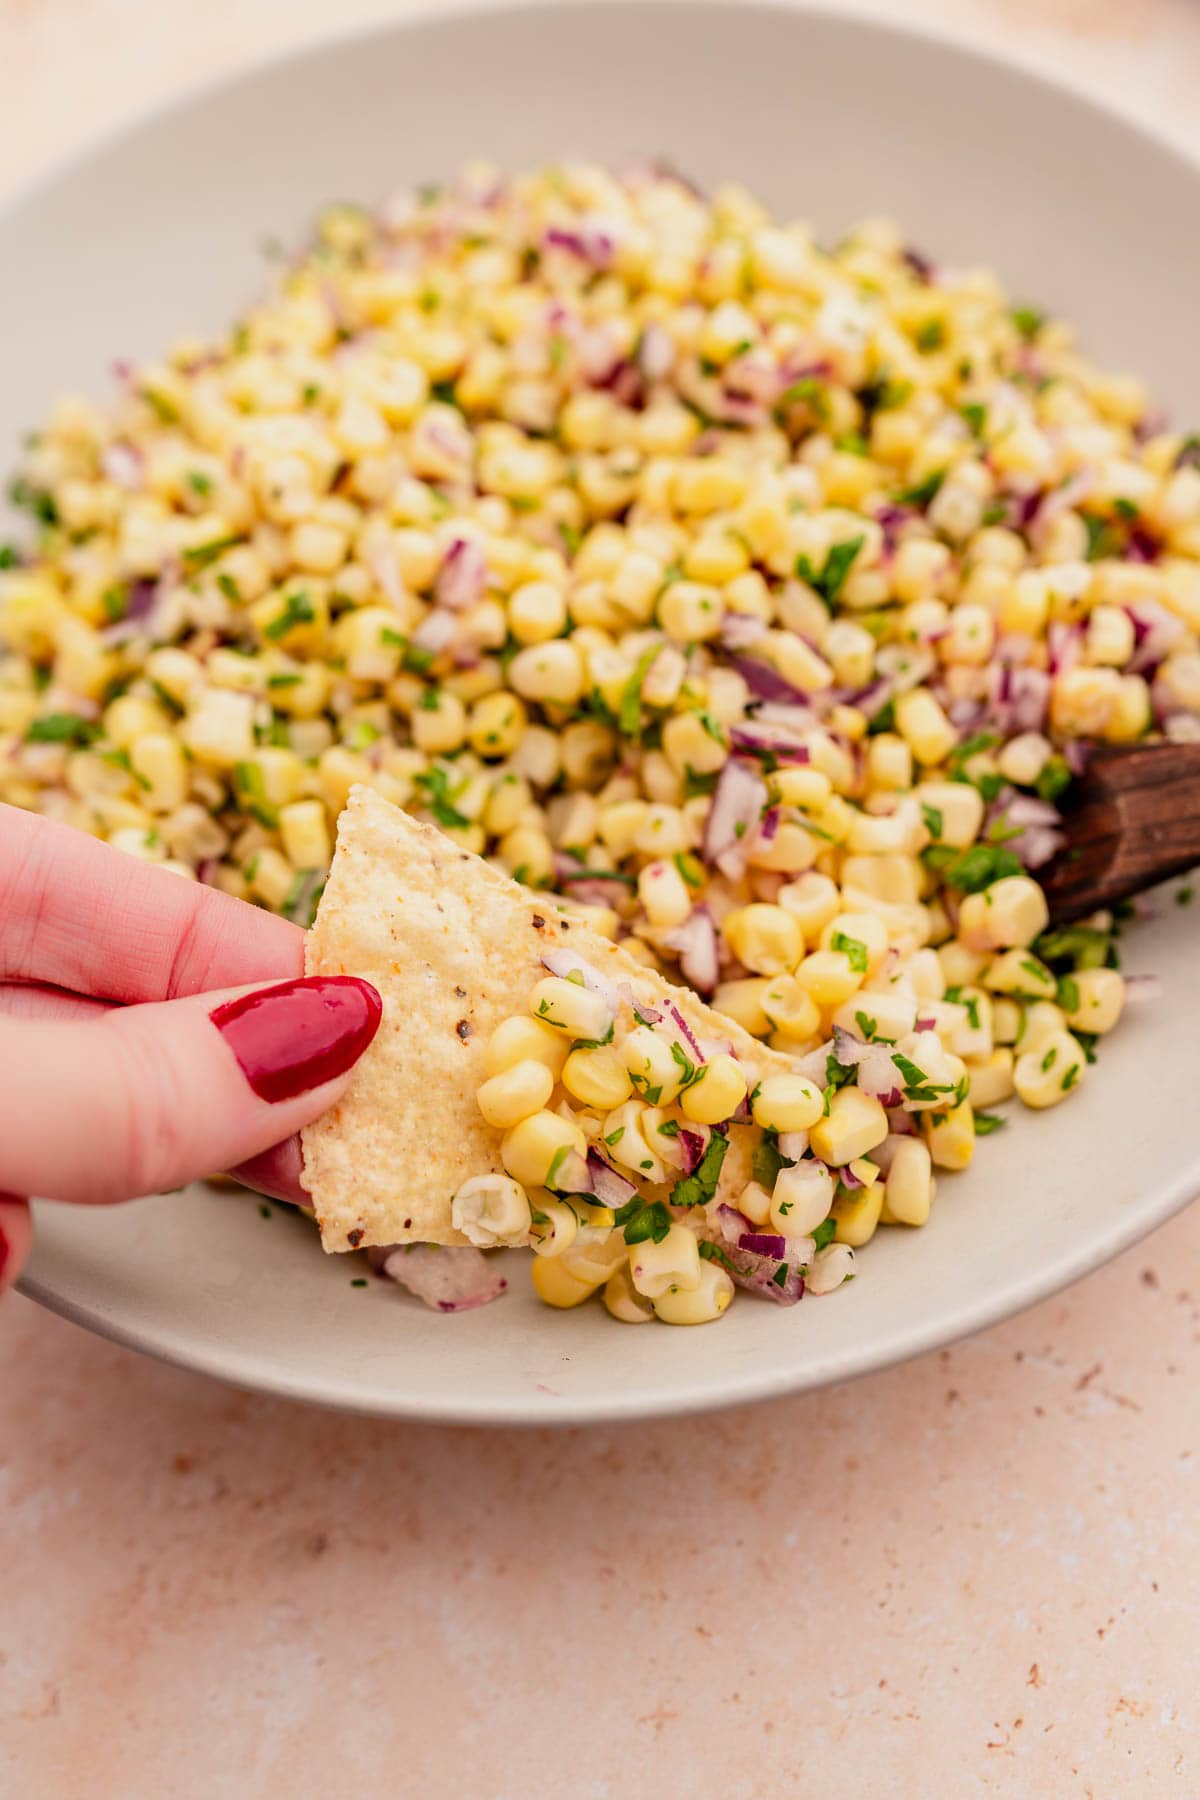 A hand is dipping a tortilla into a bowl of chipotle corn salsa.